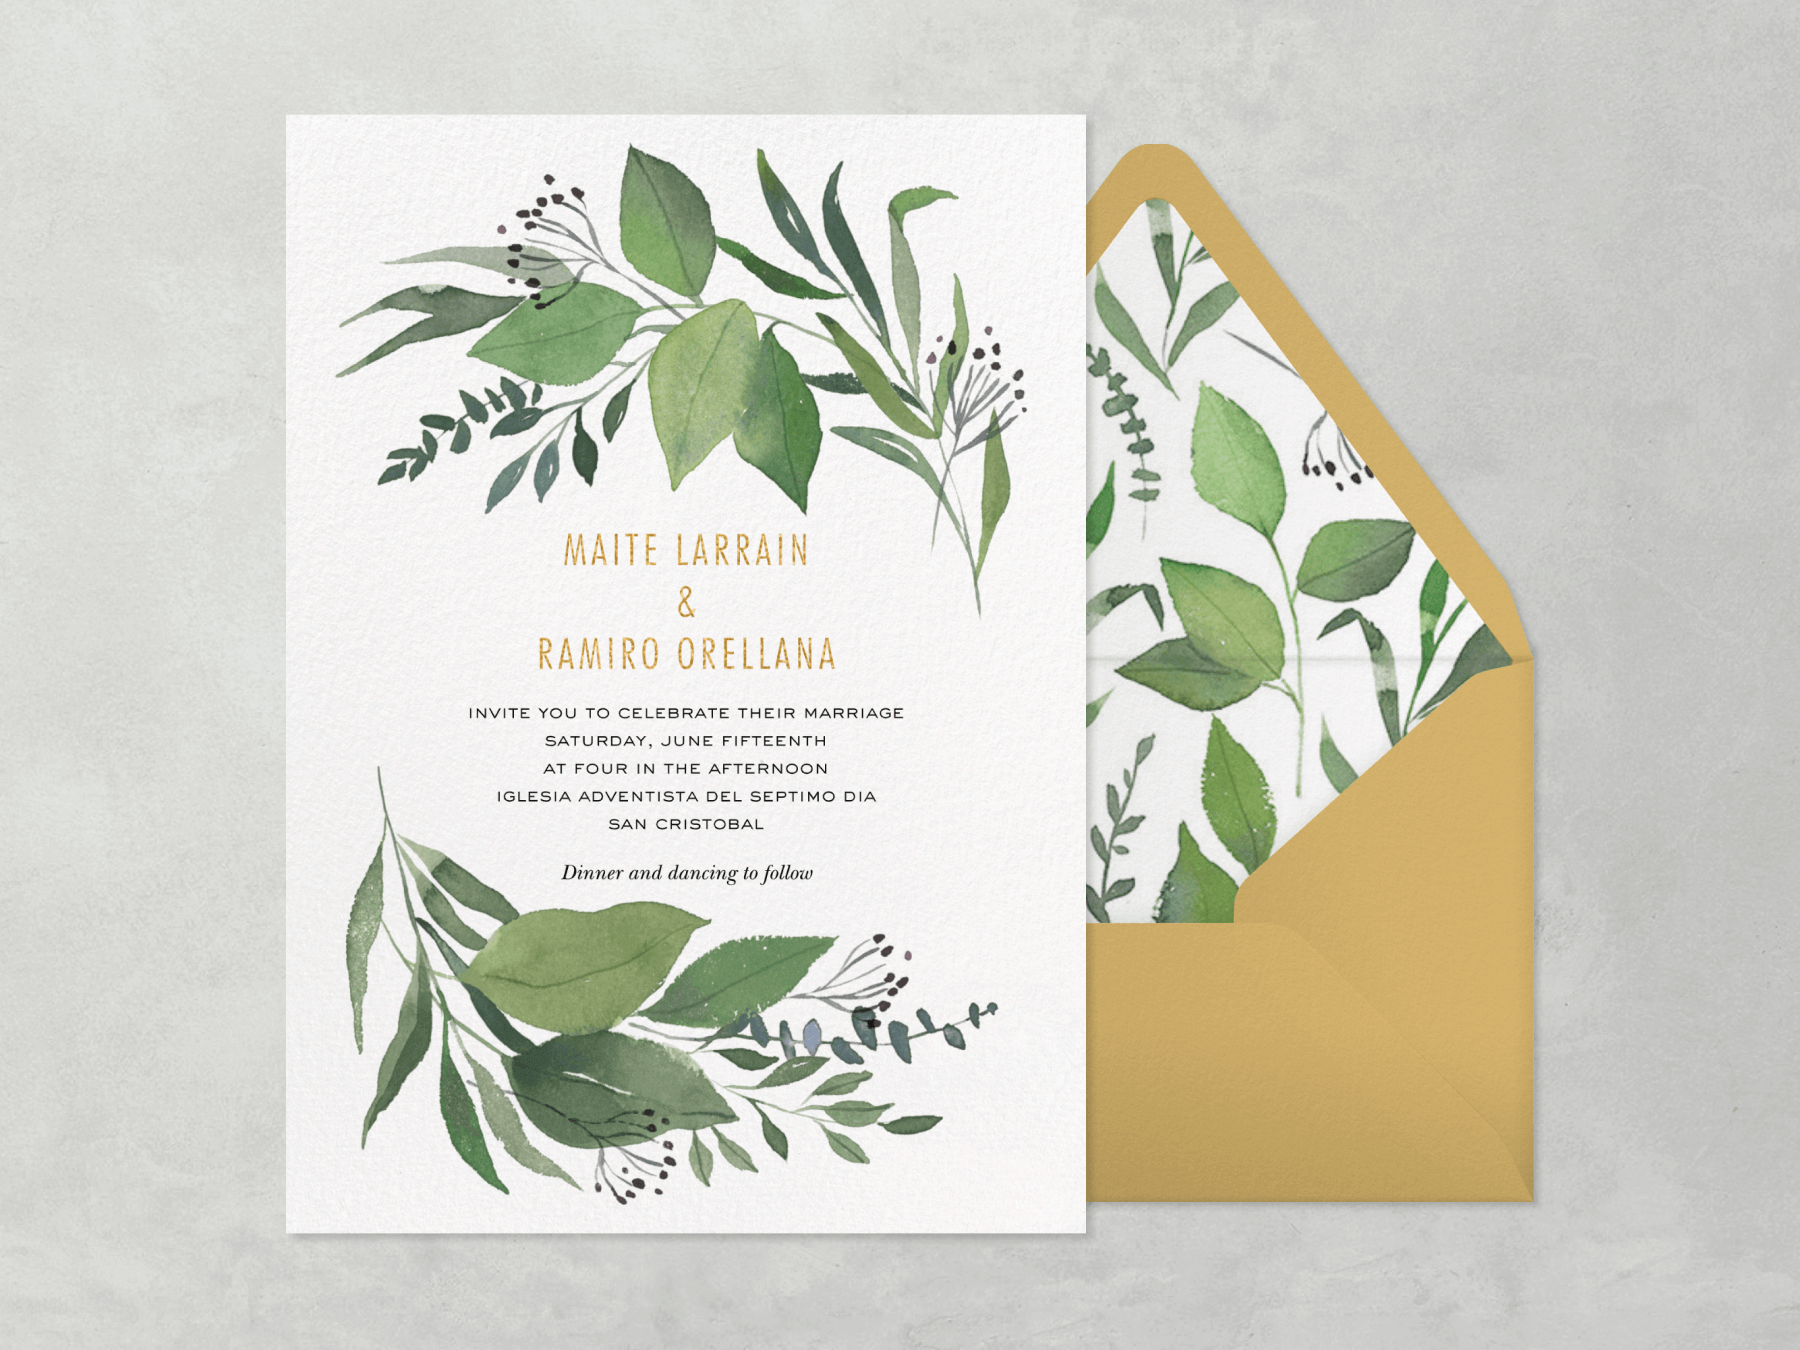 A wedding invitation with watercolor leaves and stems at the top and bottom with a gold envelope and a liner to match the invitation.